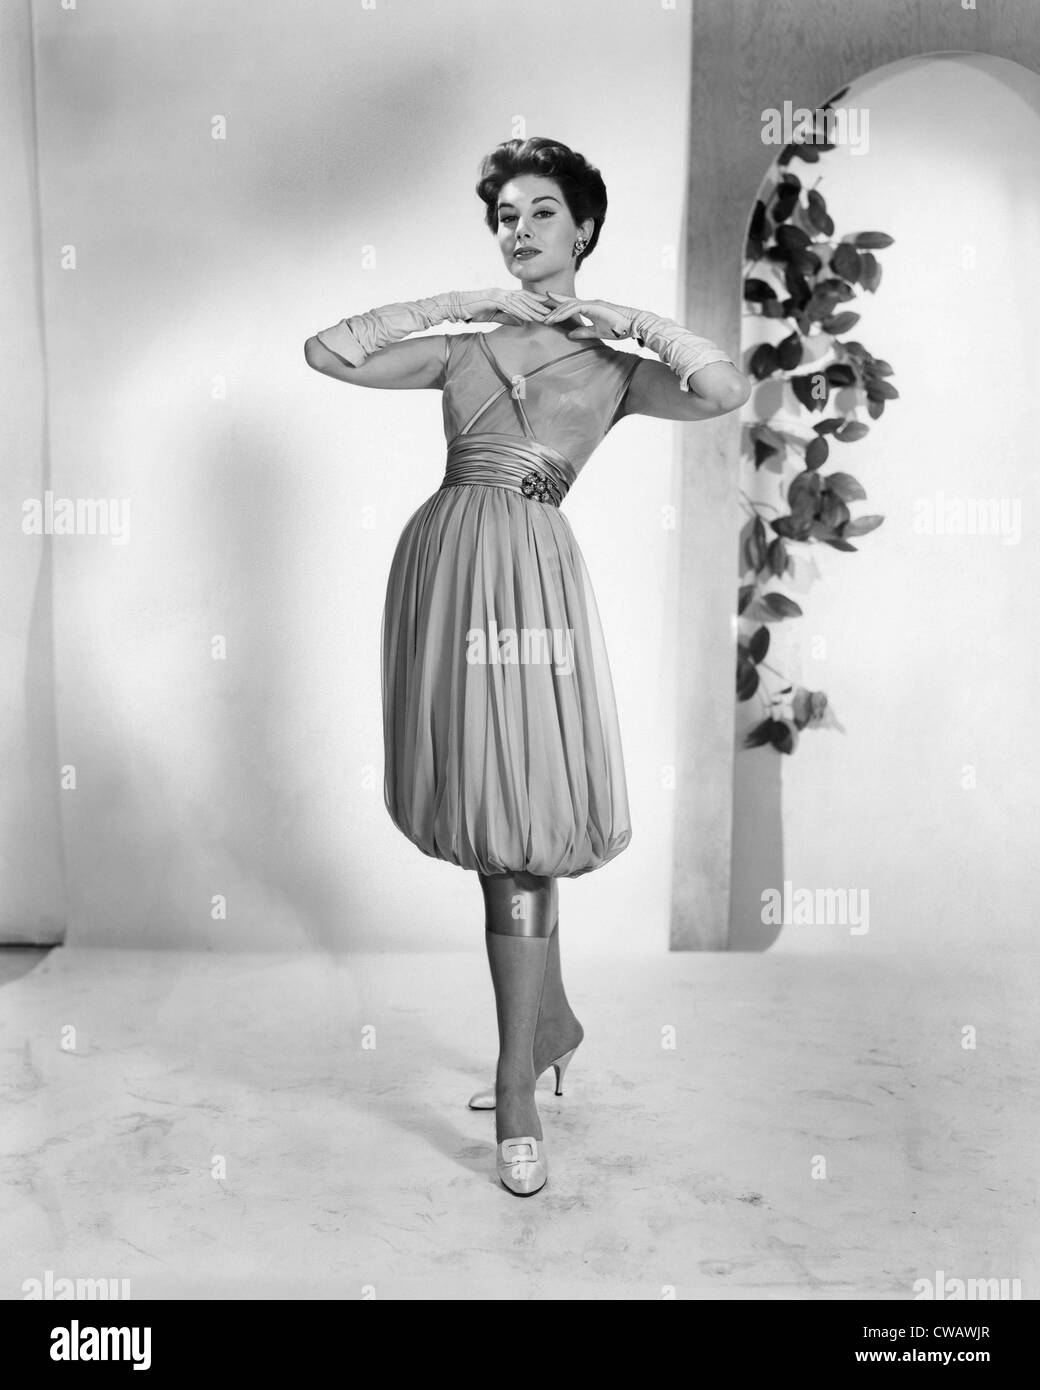 1950s fashion Black and White Stock Photos & Images - Alamy